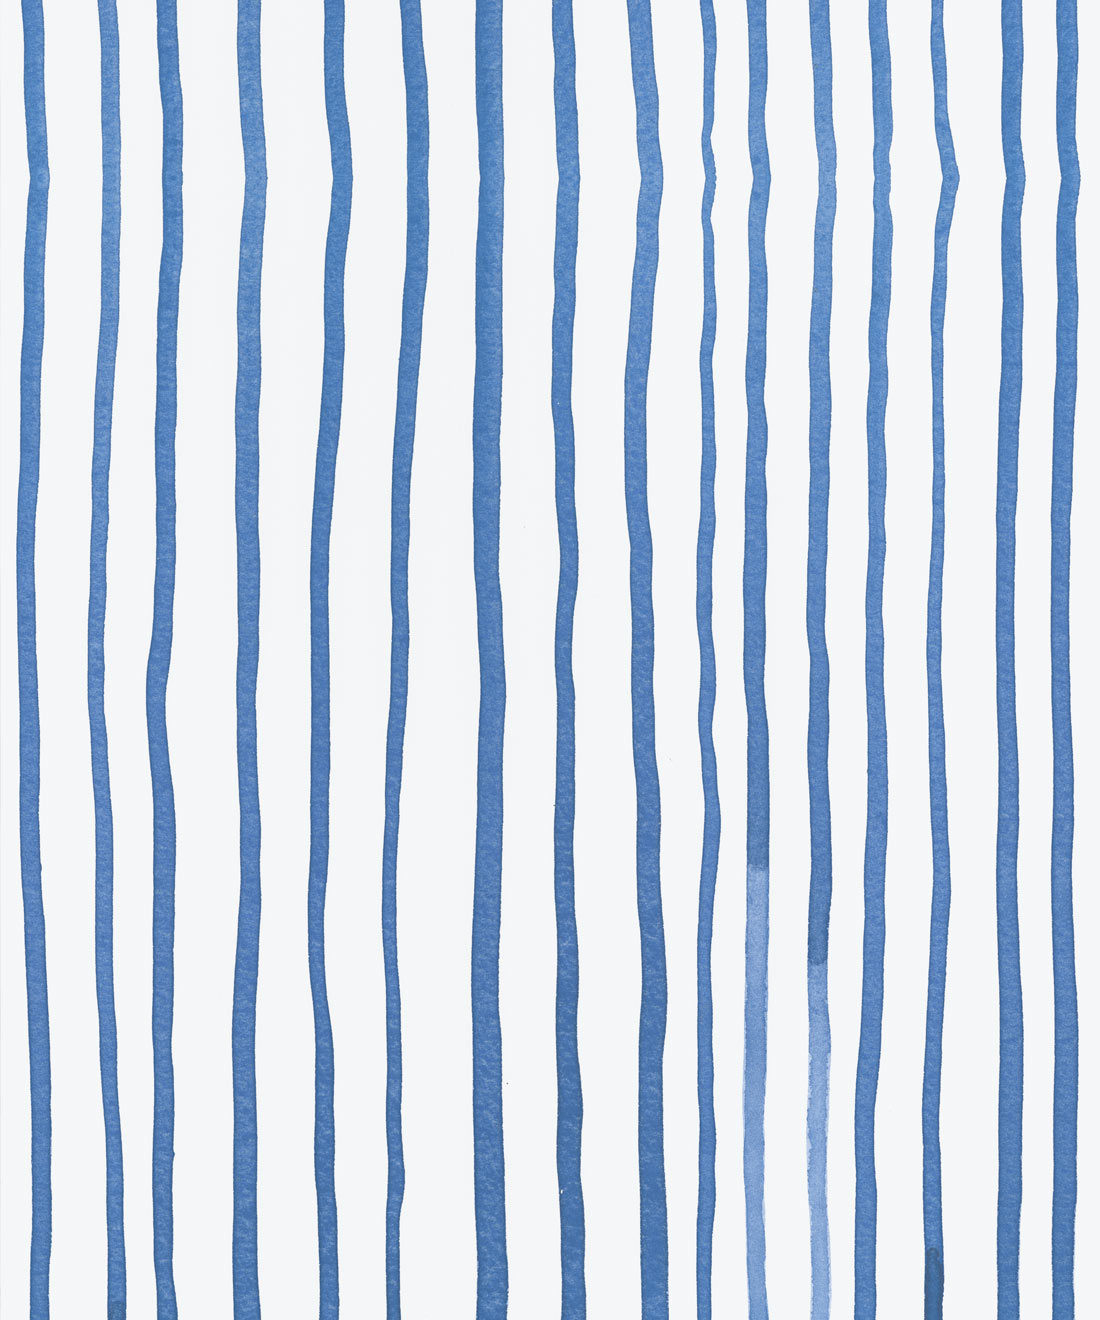 Stripes - 1 708 Red And White Stripes Illustrations Clip Art Istock ...